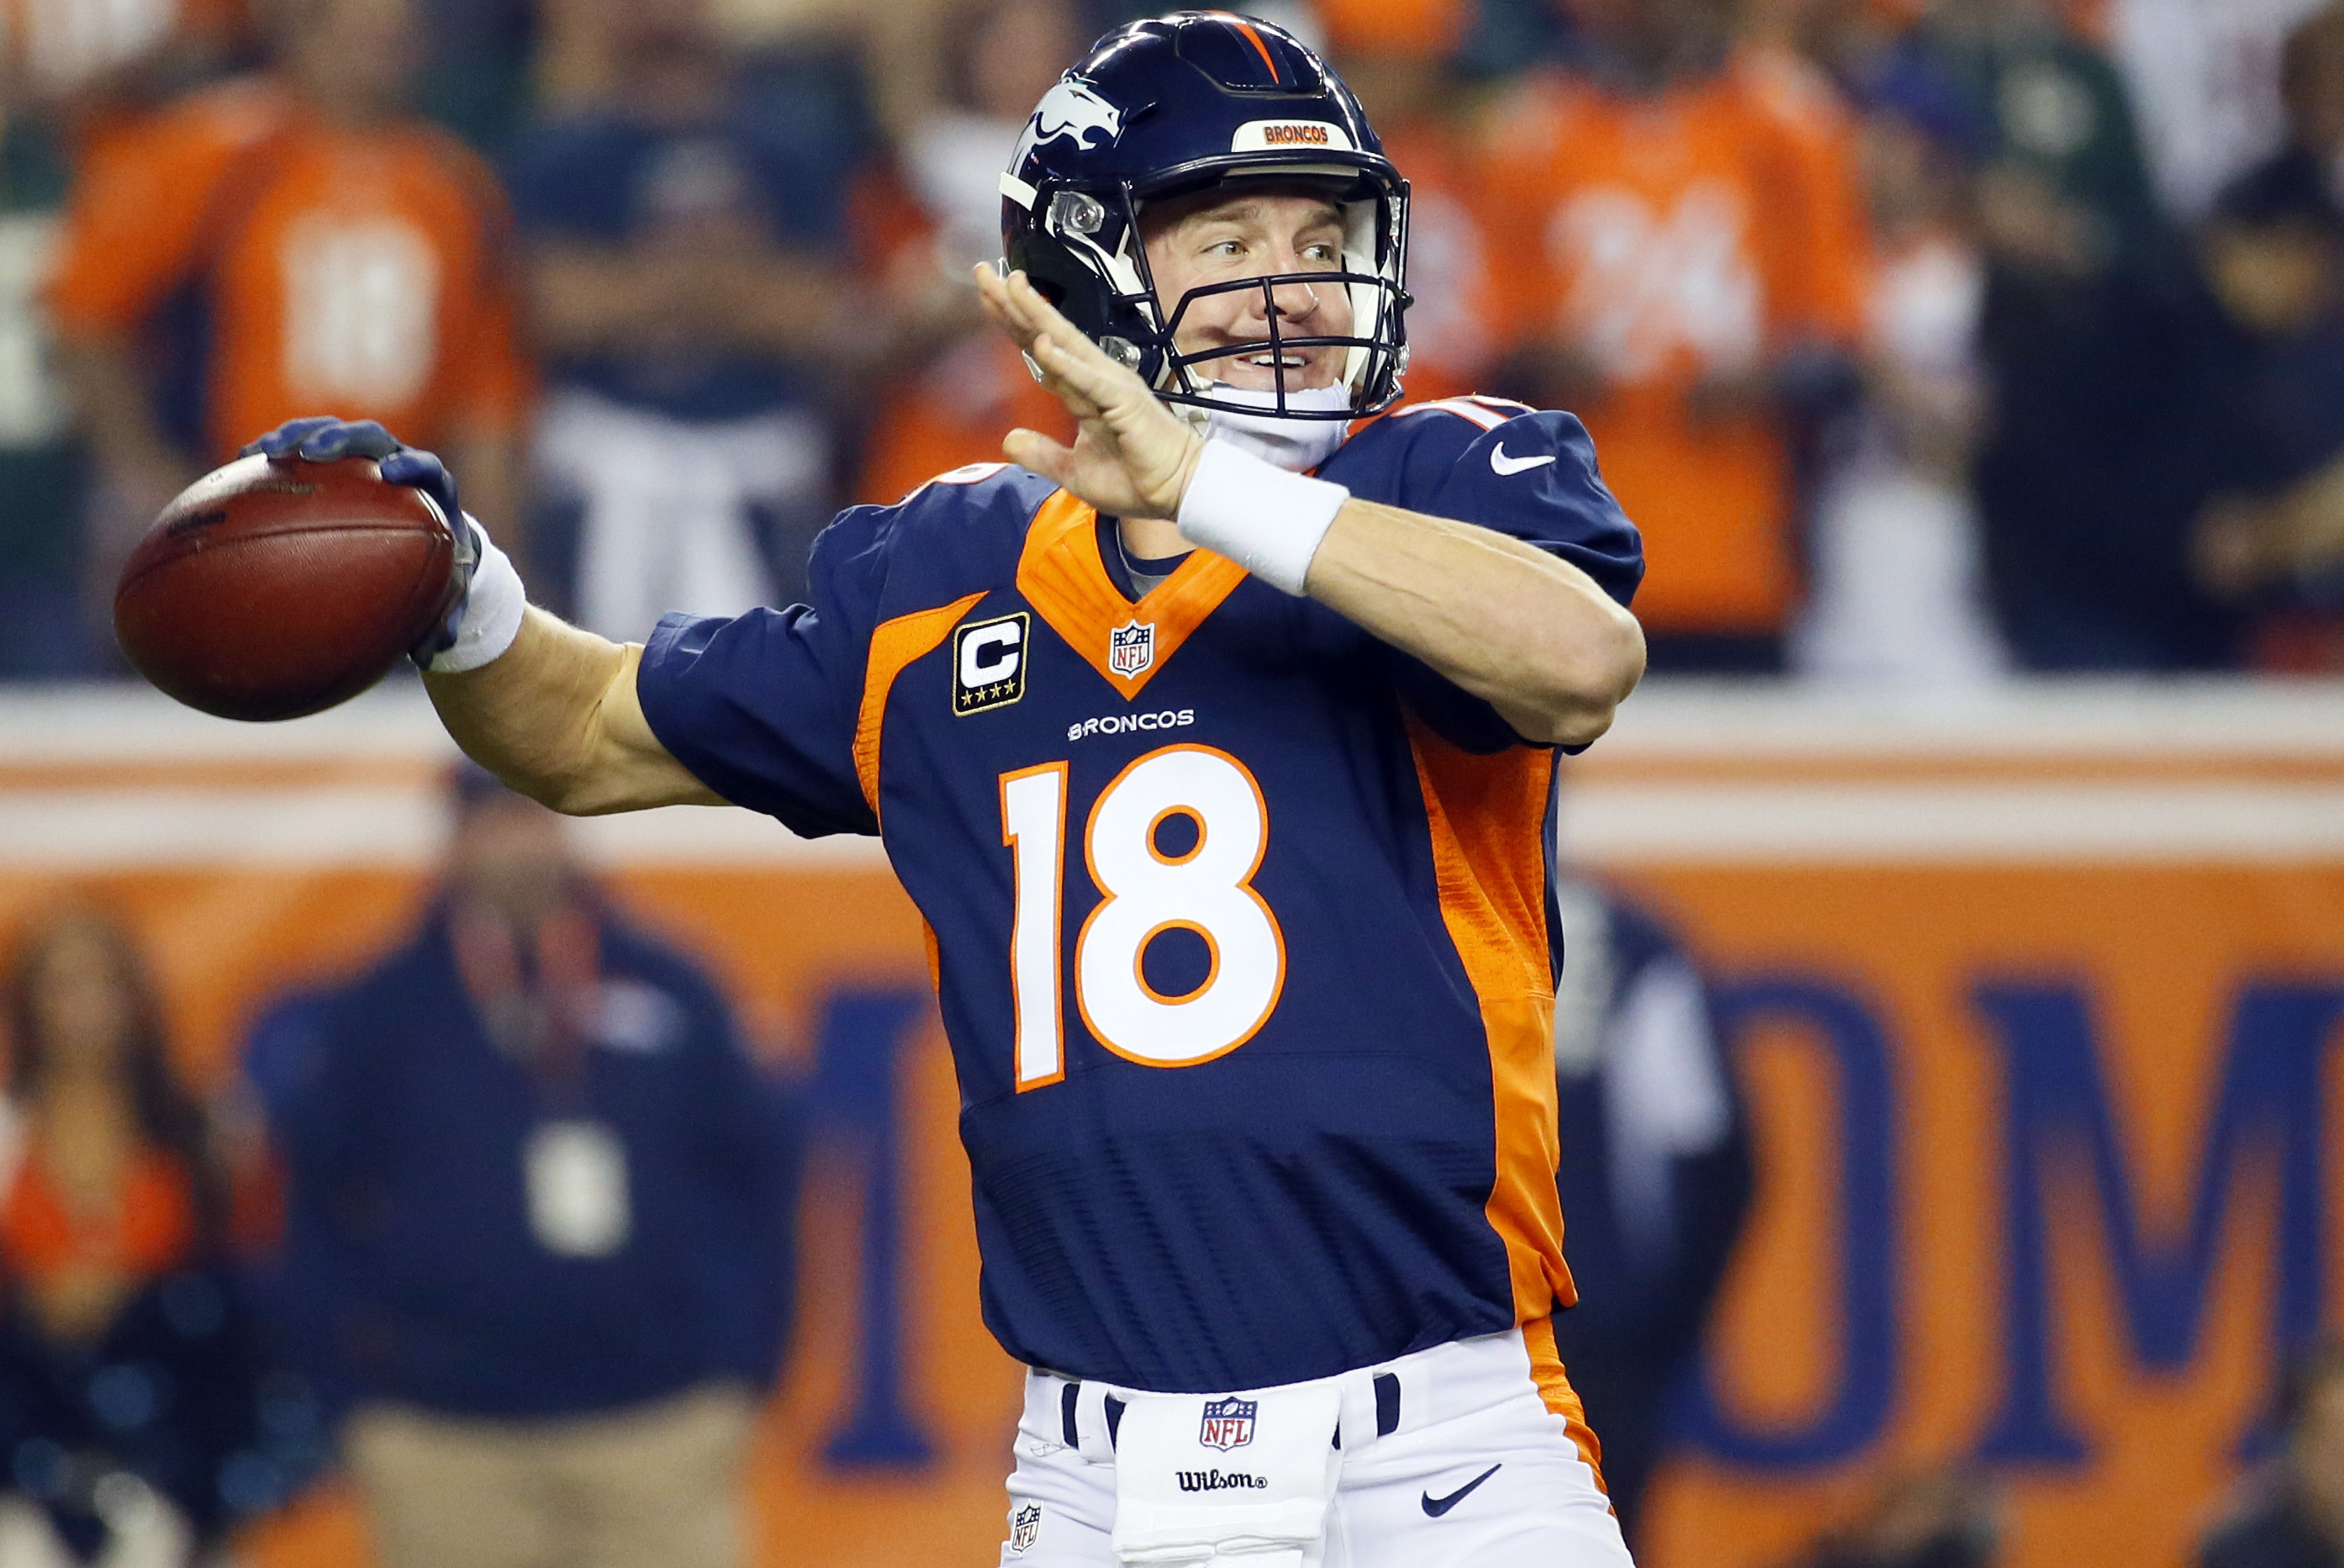 Dominant defense carries Manning, Broncos to 24-10 Super Bowl win